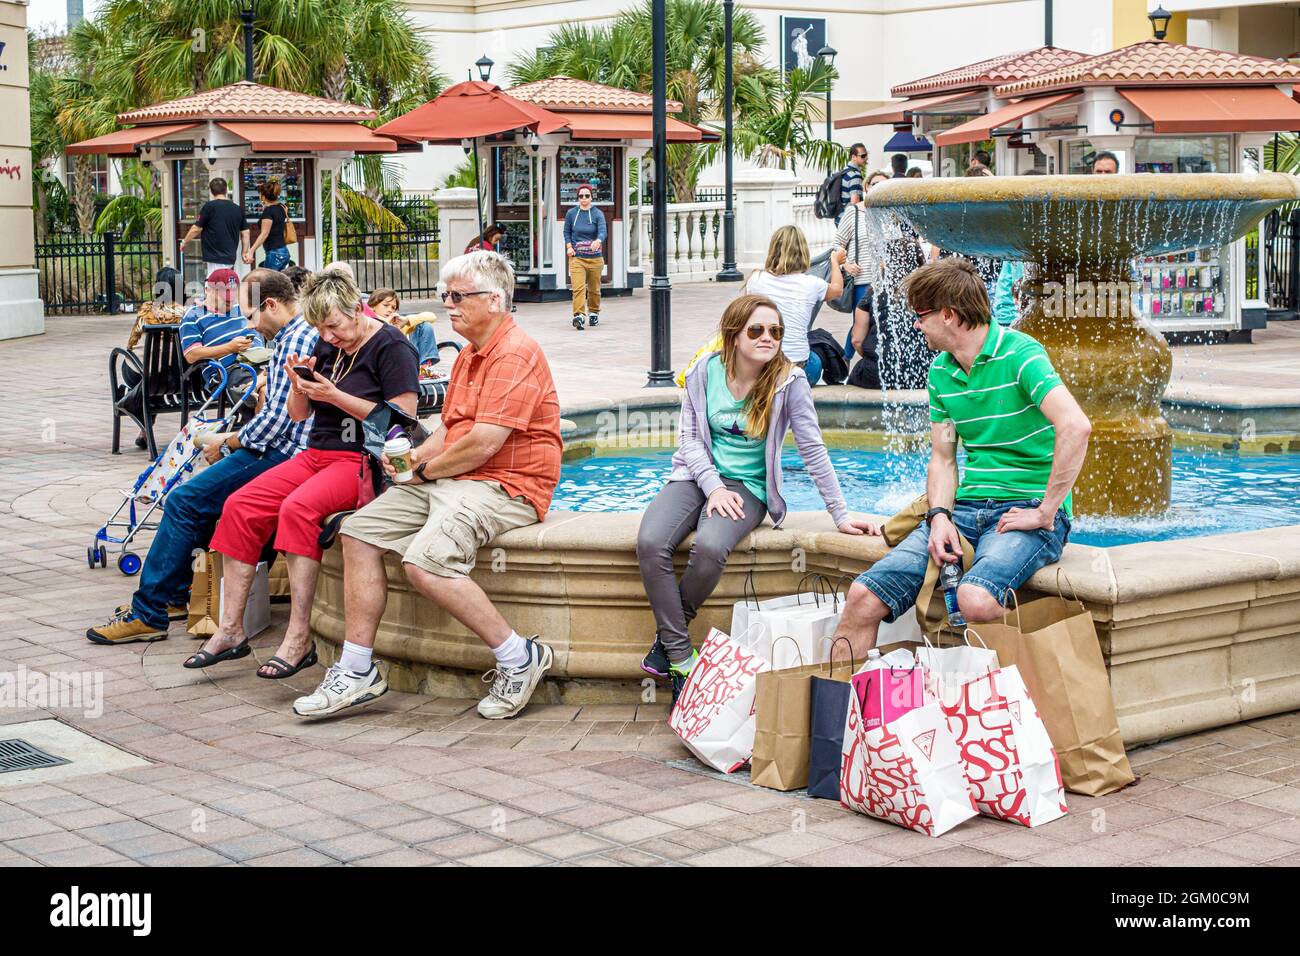 Orlando Florida,Orlando Premium Outlets International Drive,shopping shoppers shops stores,fountain bags teen teens teenagers girls resting family Stock Photo